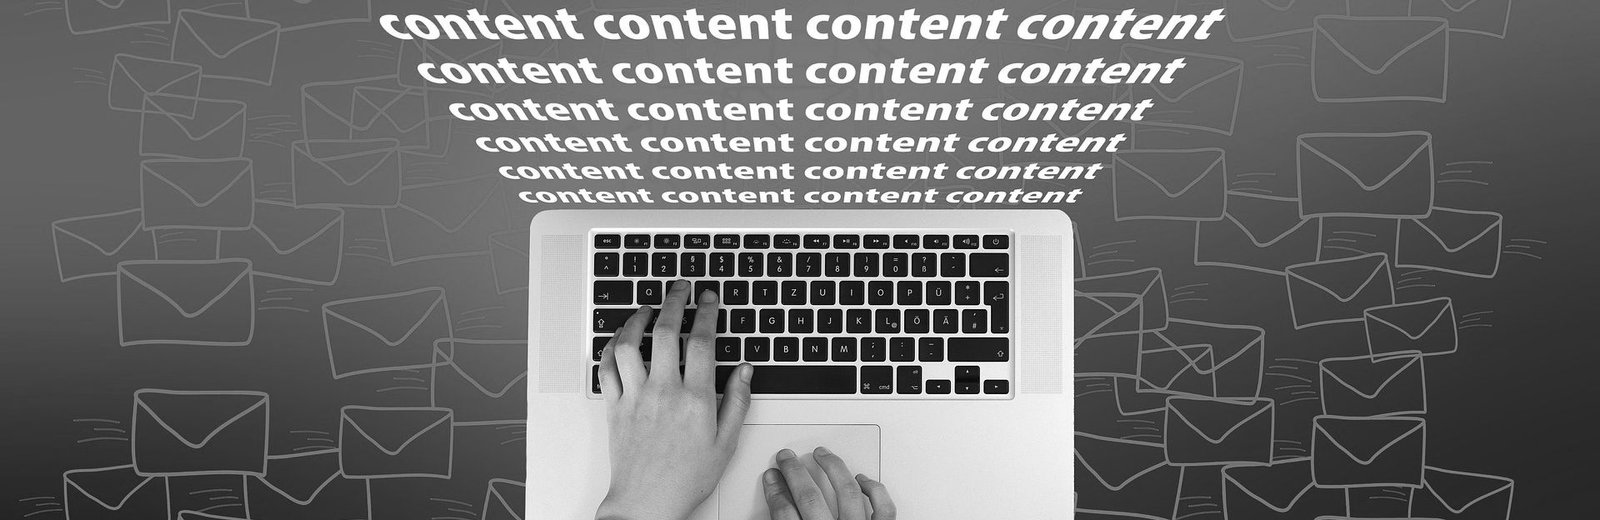 content writing service